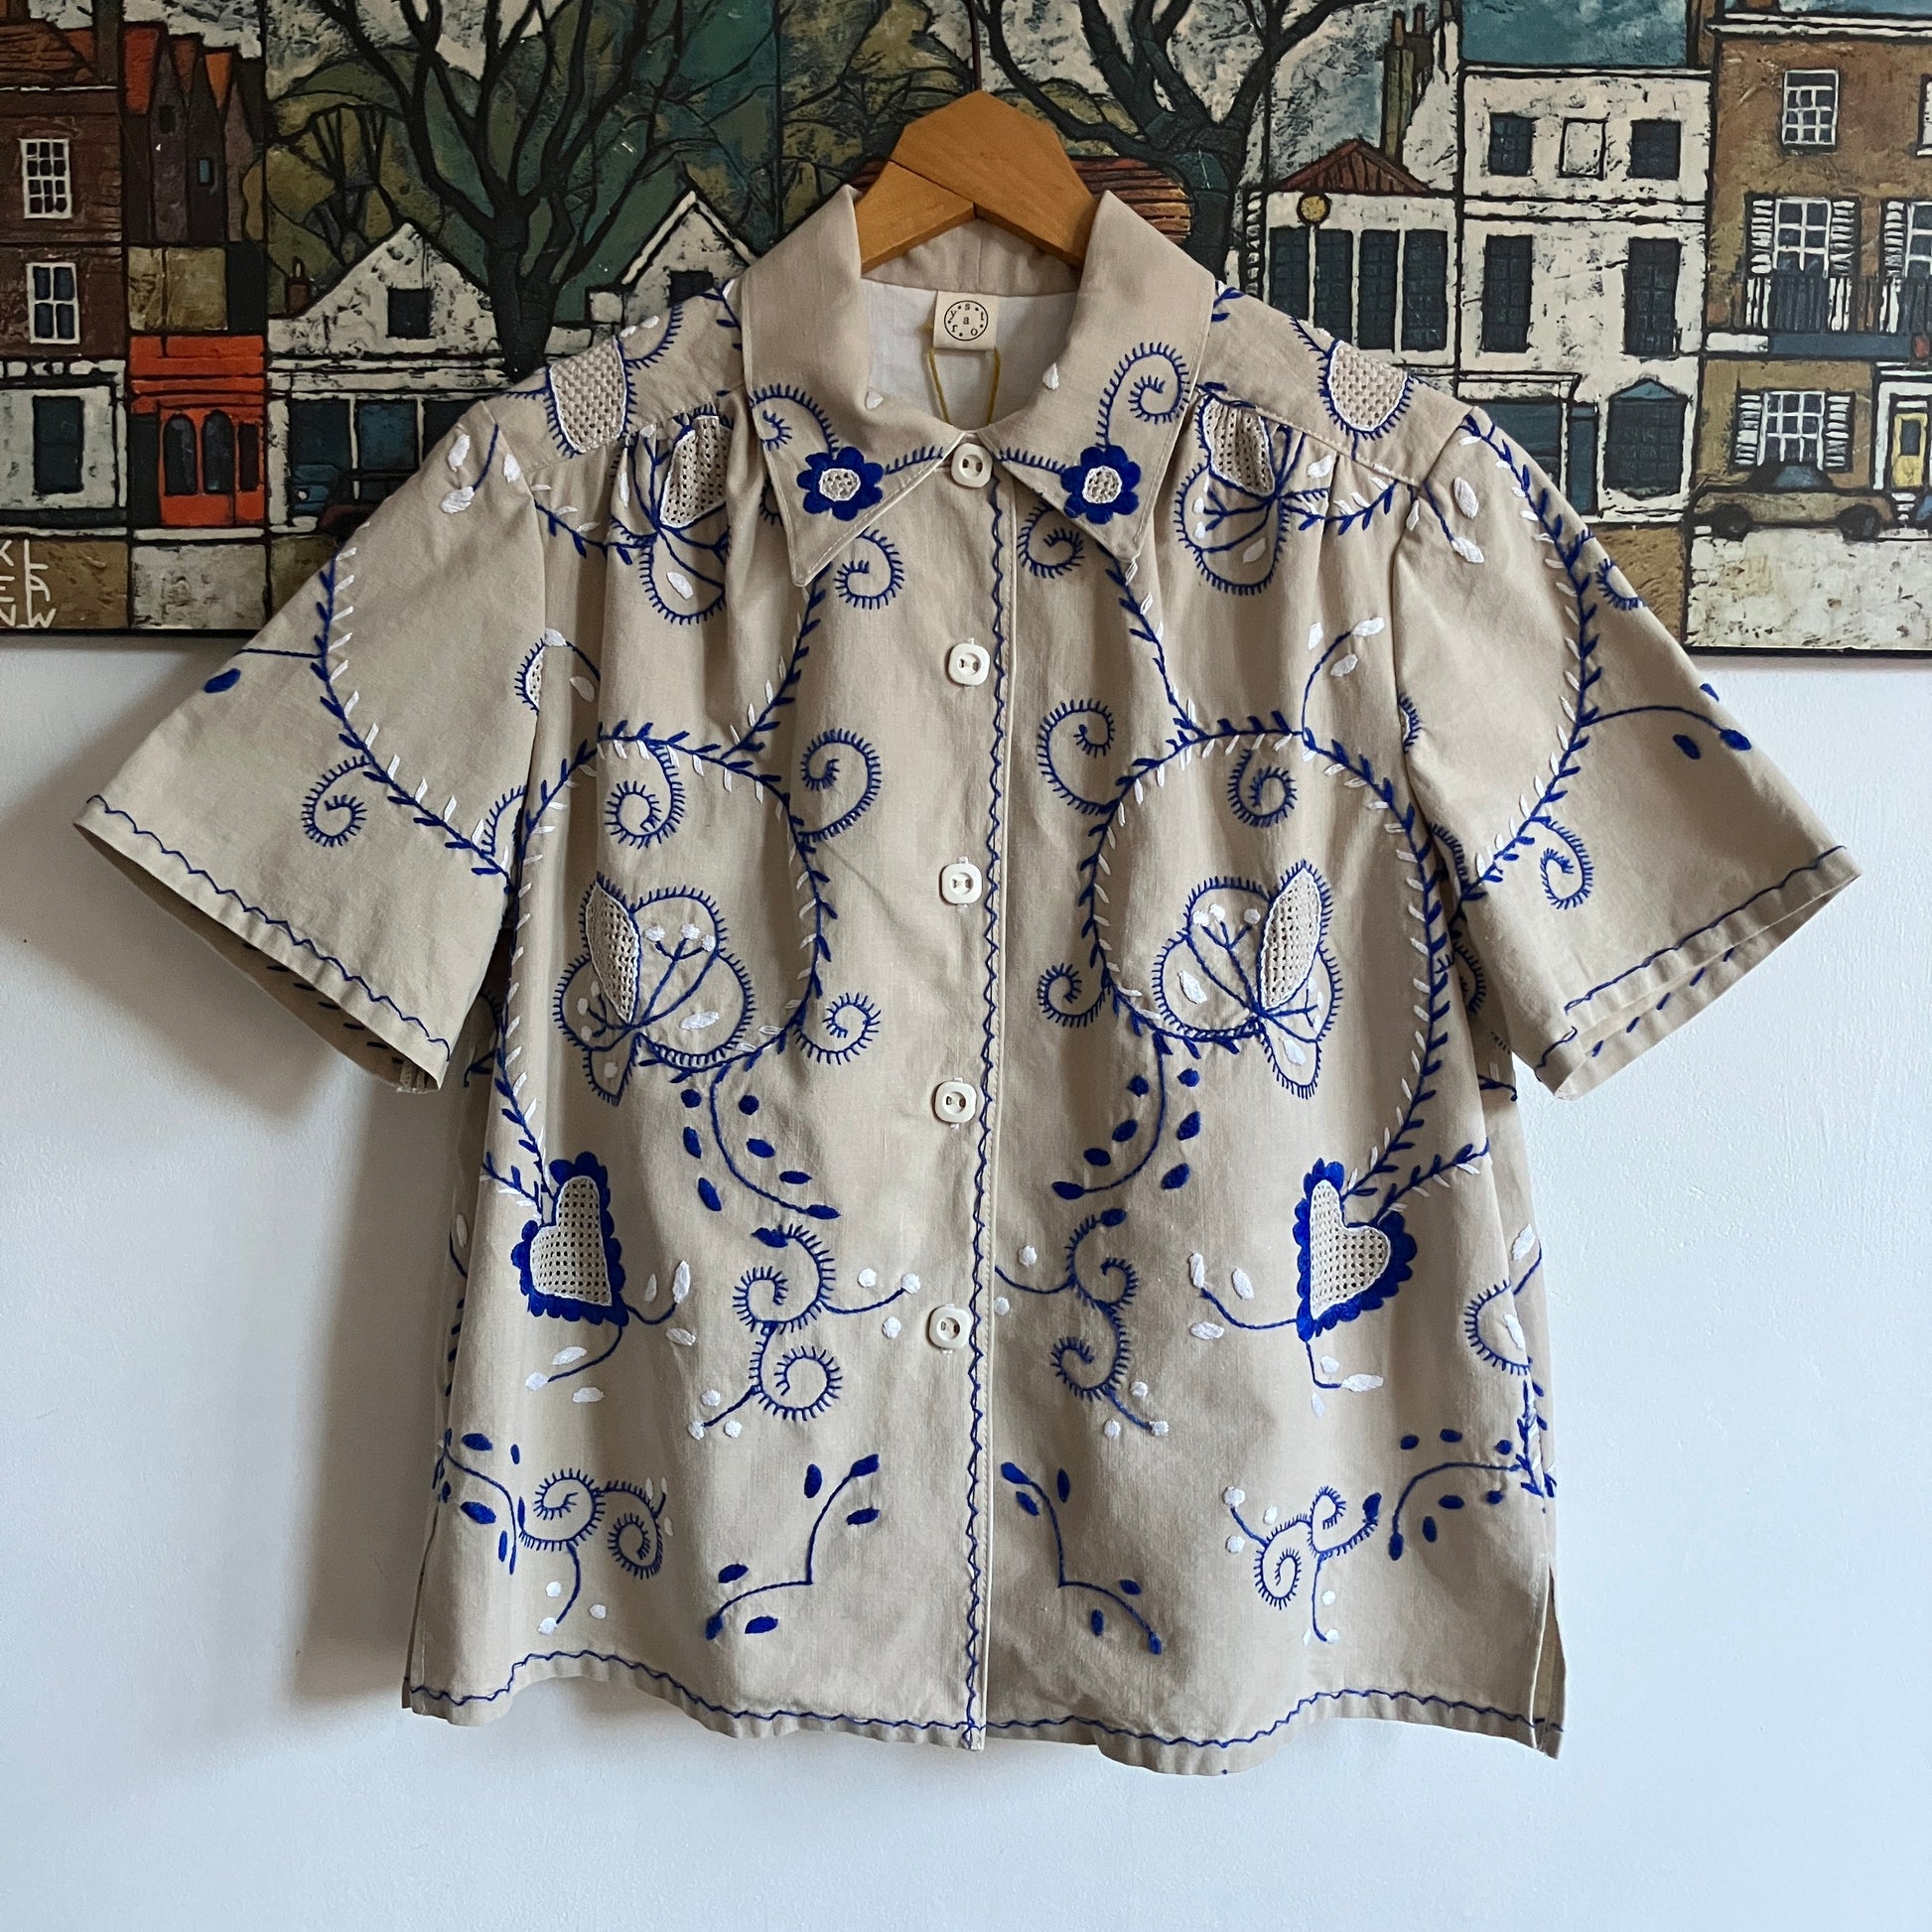 shirt hand made from a recycled embroidered tablecloth